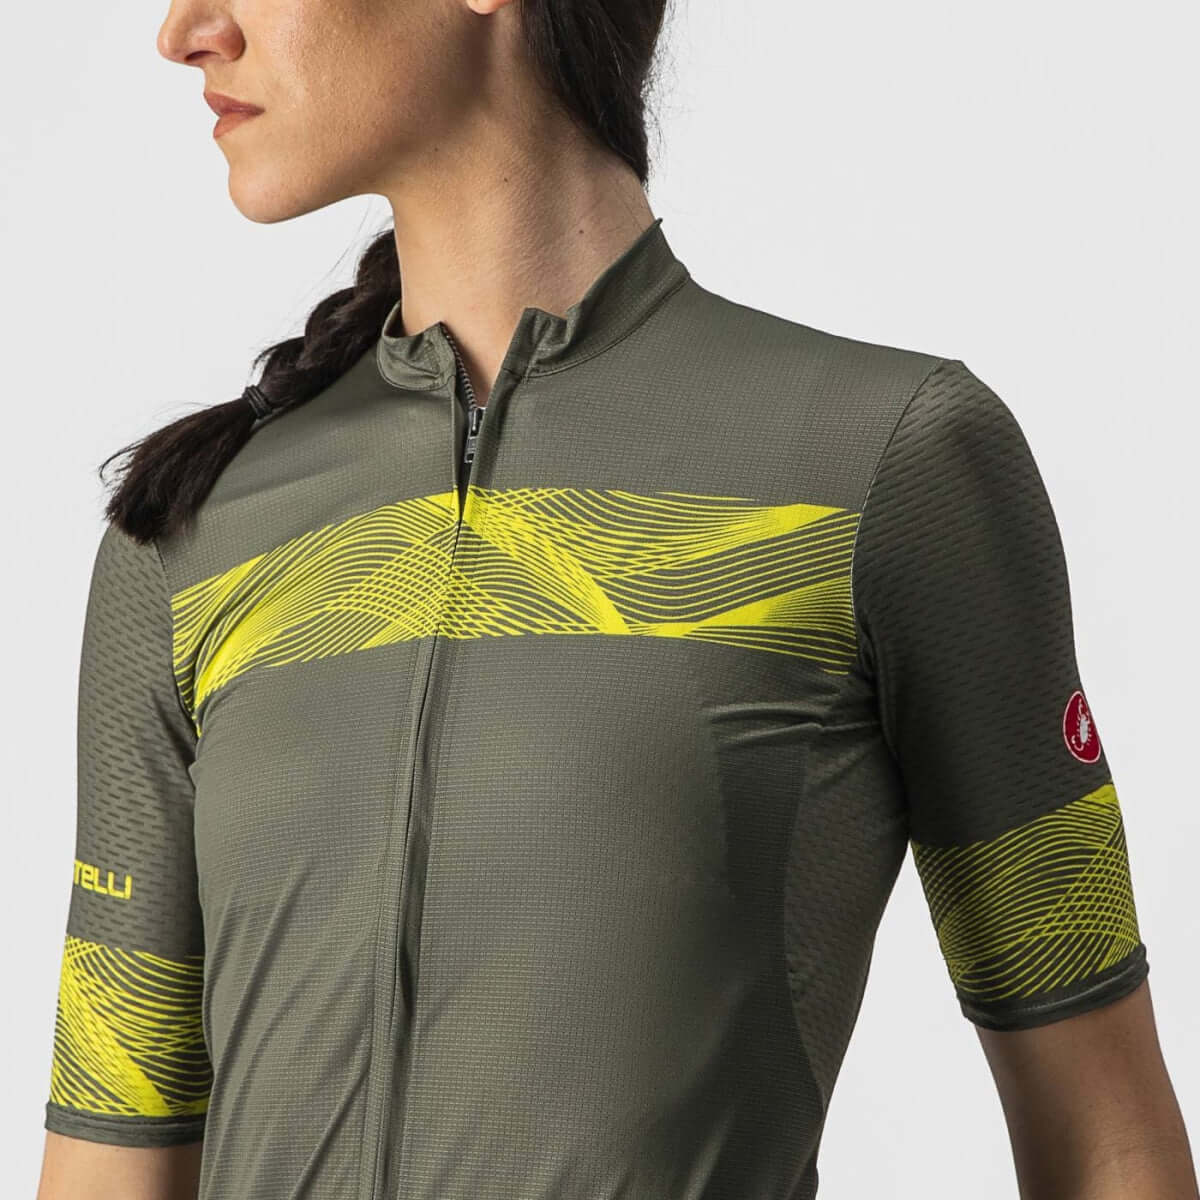 Castelli Fenice Womens Cycling Jersey (Military Green/Sulphur)